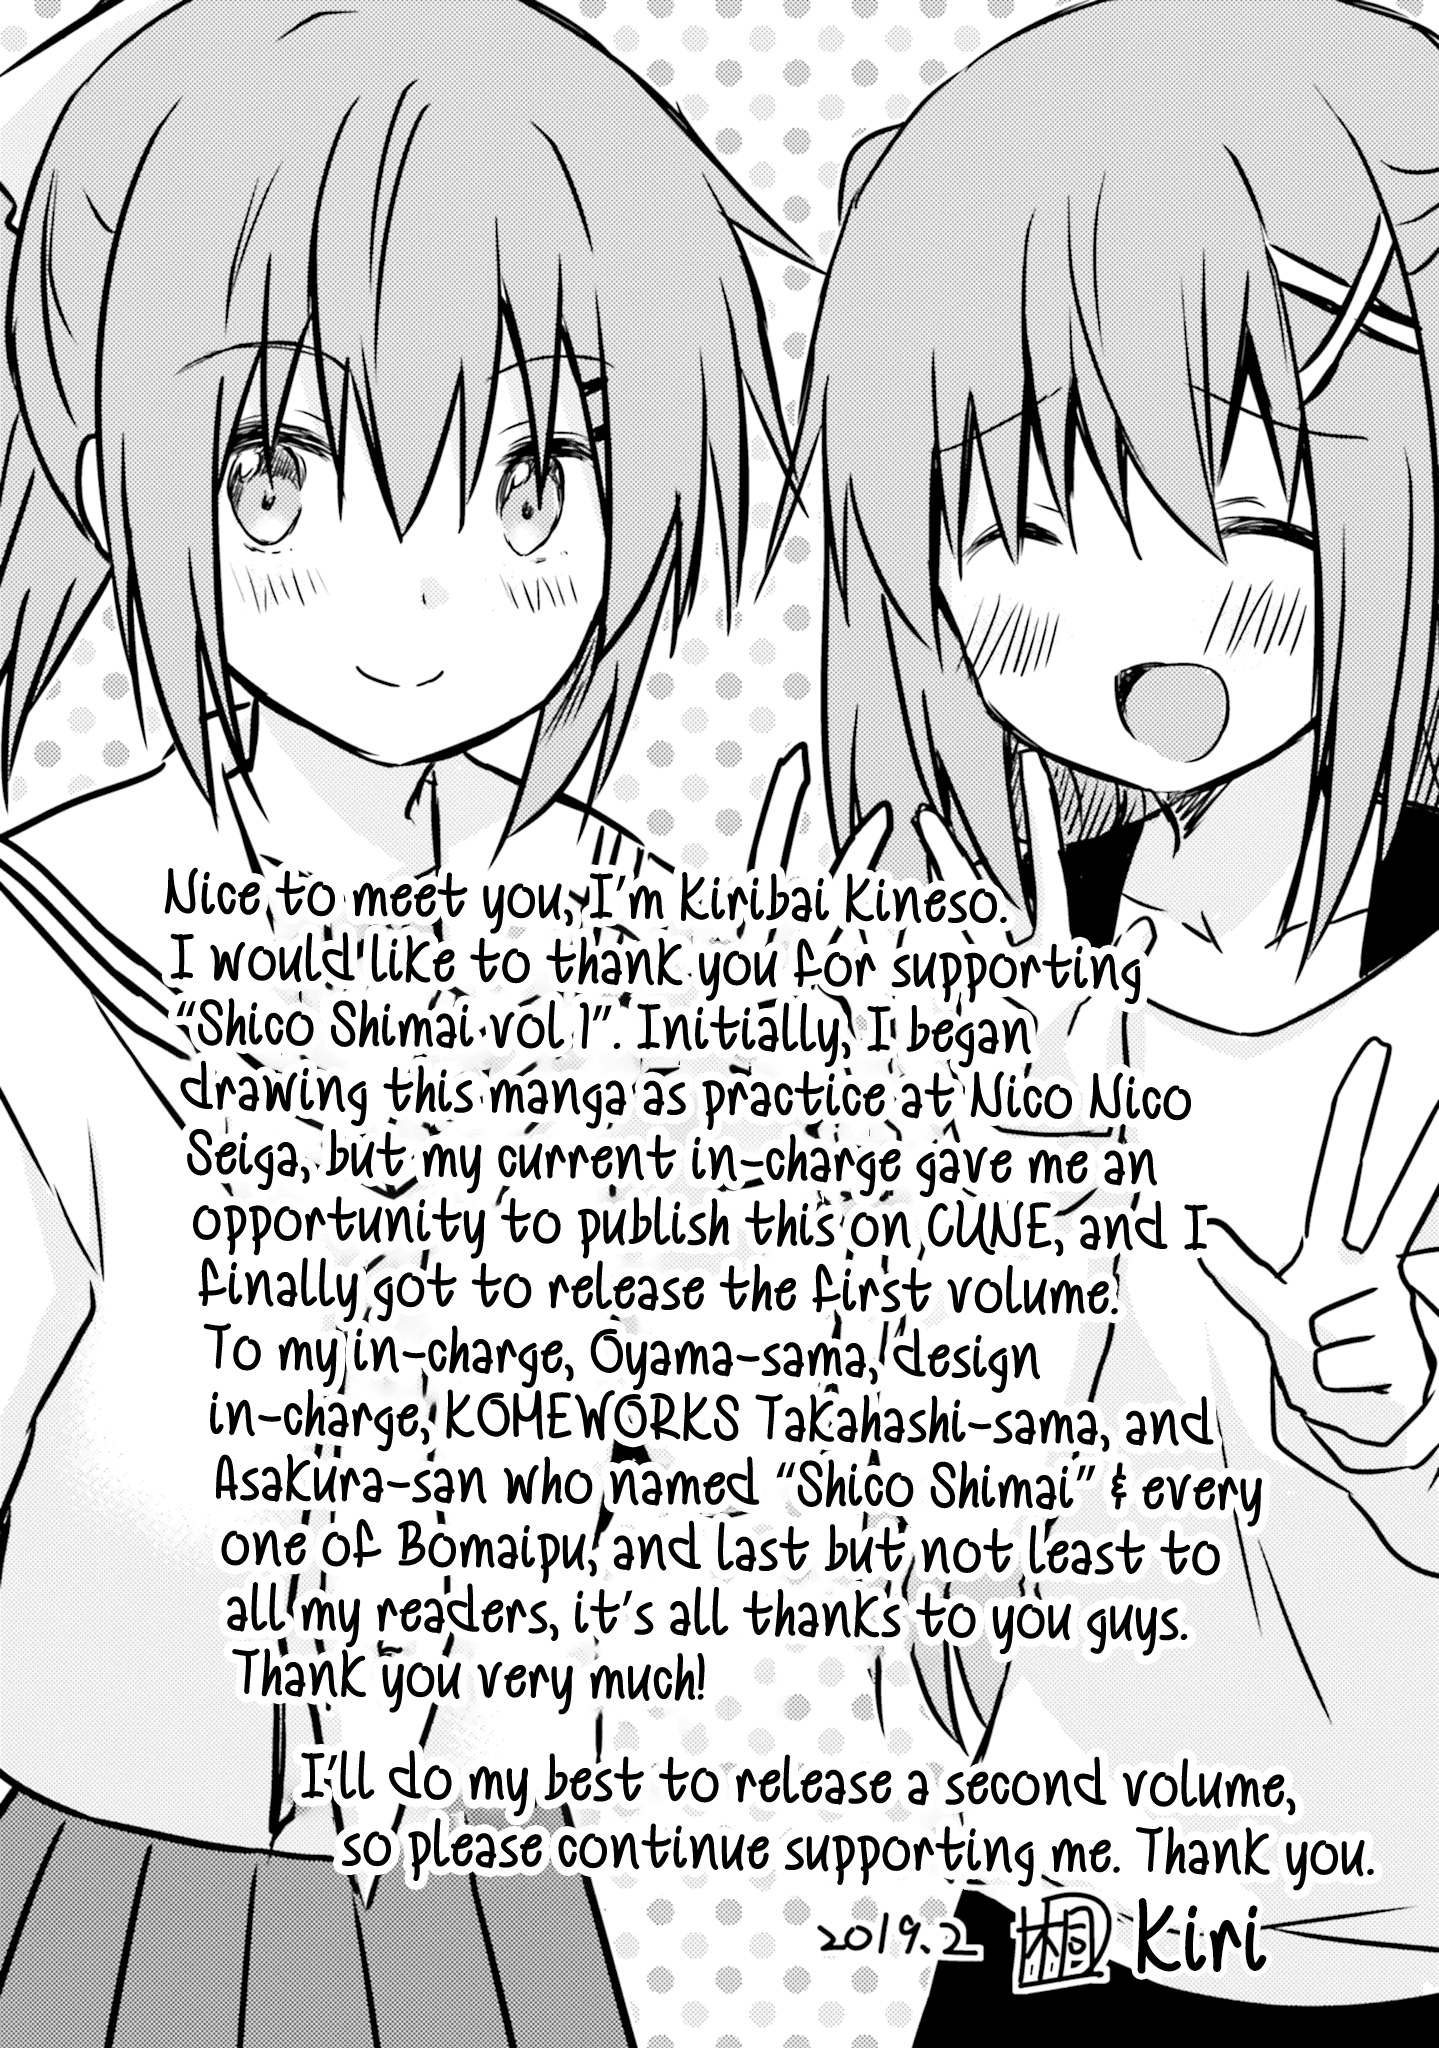 Her Elder Sister Has a Crush on Her, But She Doesn't Mind Chapter 8: Siscon Elder Sister and a Friend Acting Strangely, and a Little Sister Playing Social Games ②